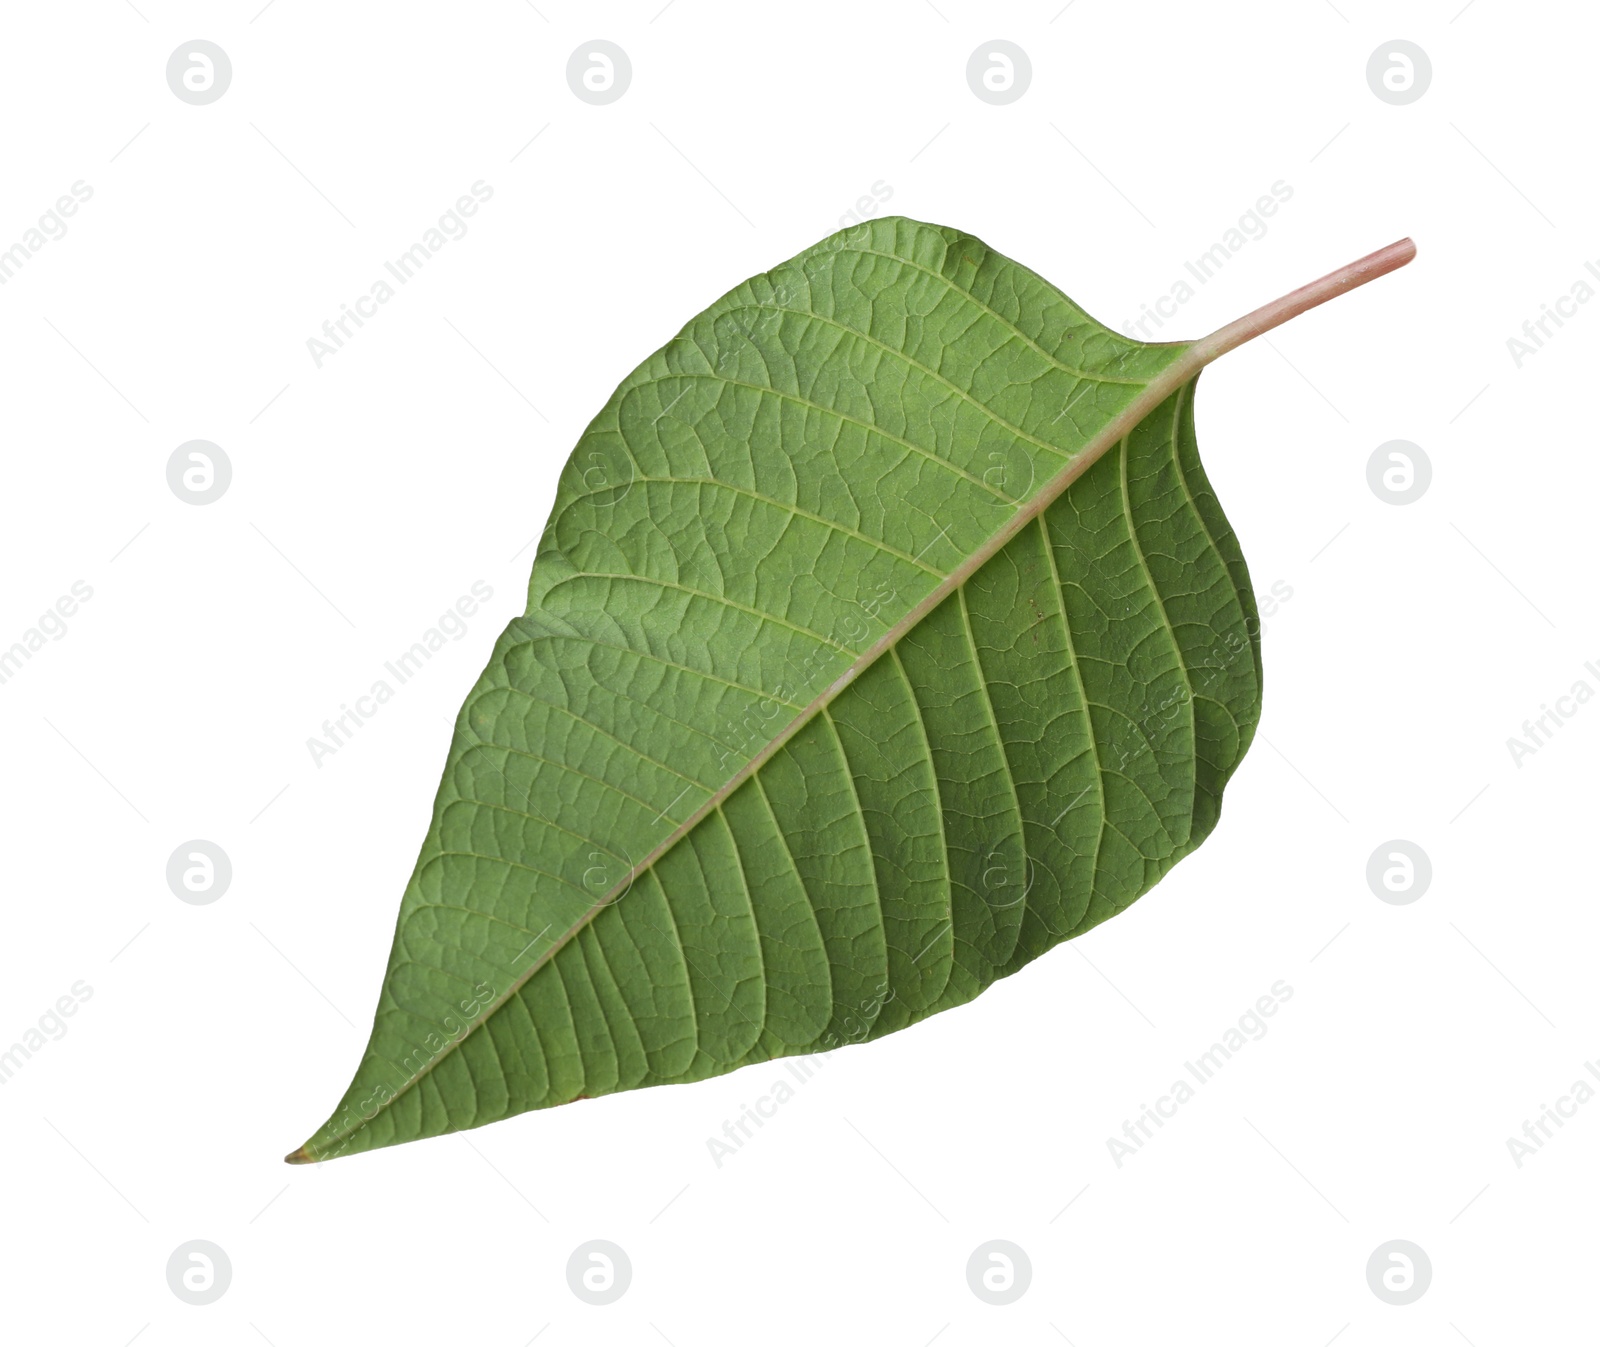 Photo of Leaf of tropical poinsettia plant isolated on white